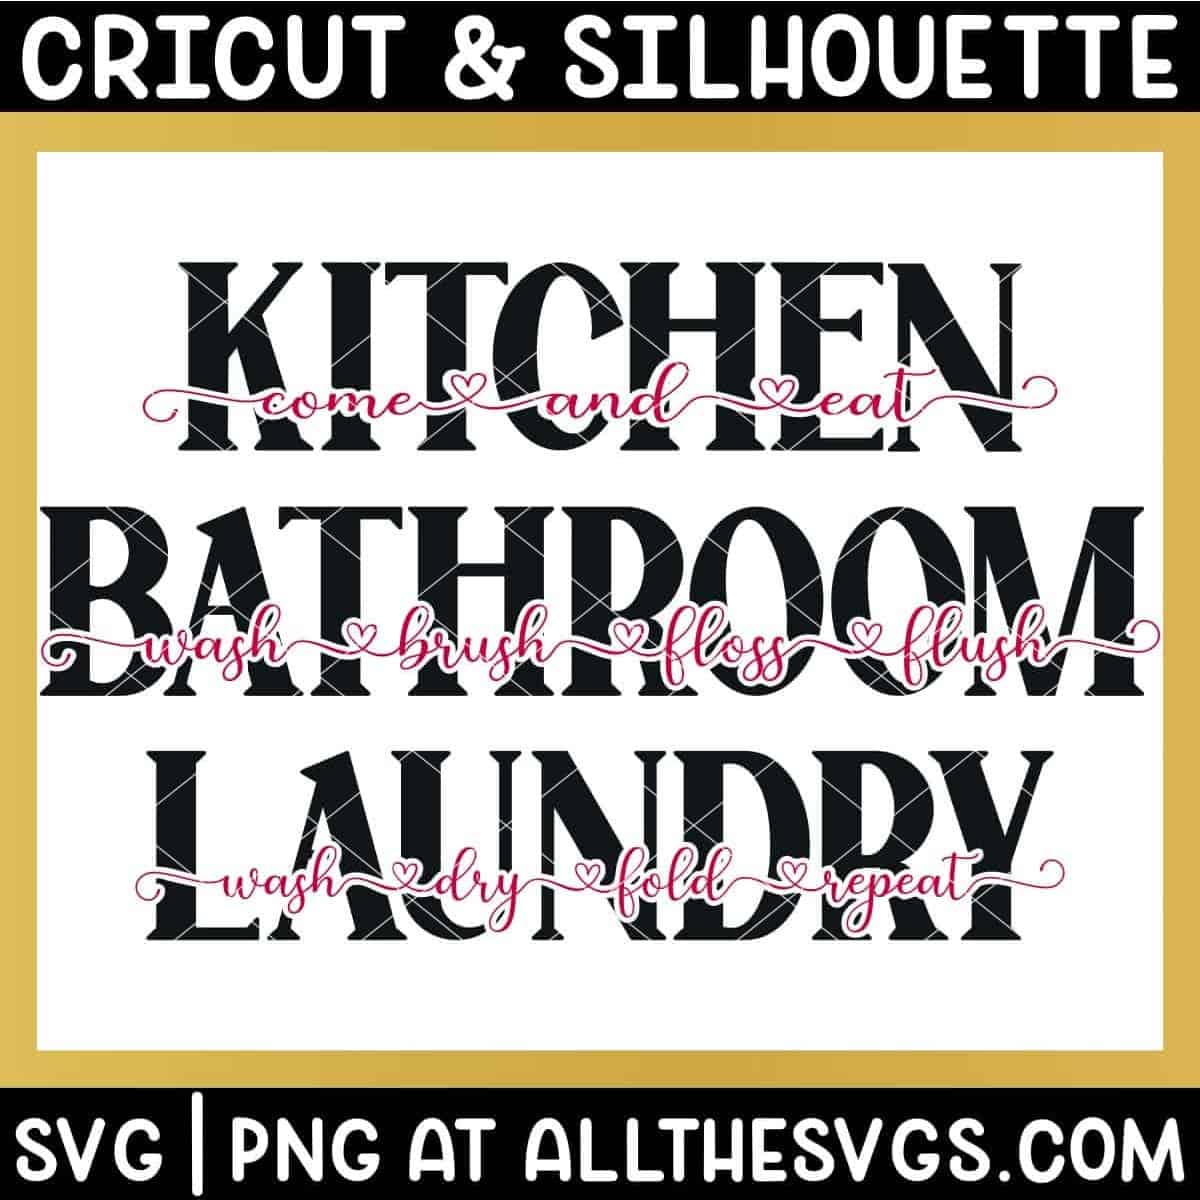 kitchen, bathroom, laundry in bold caps with accompanying quote in cursive with heart glyphs as knockout.